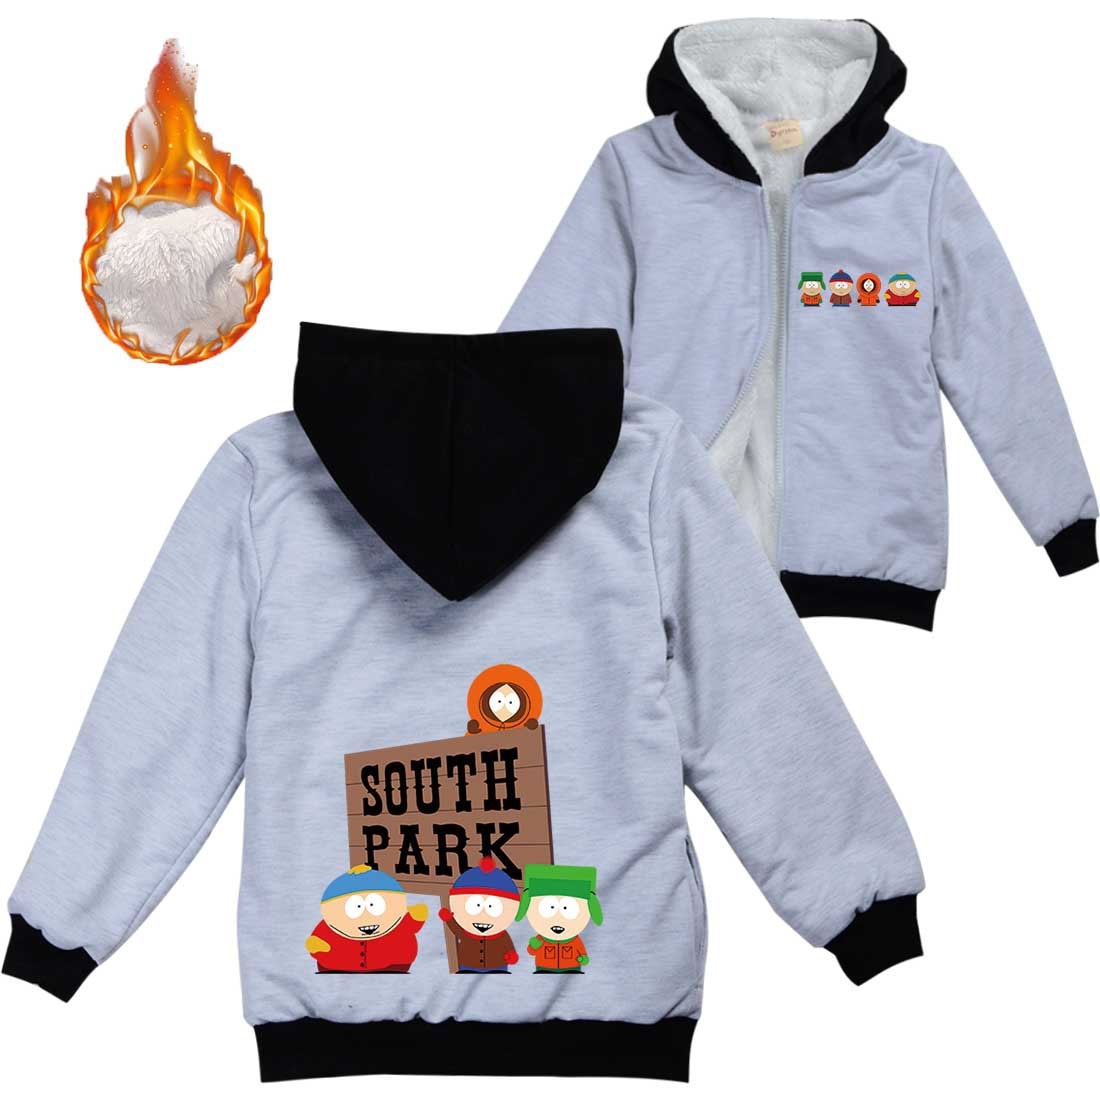 Anime S Southes Park Clothes Kids Warm Thick Velvet Hoody Jacket Teenager Boys Clothes Baby Girls 2 - South Park Plush